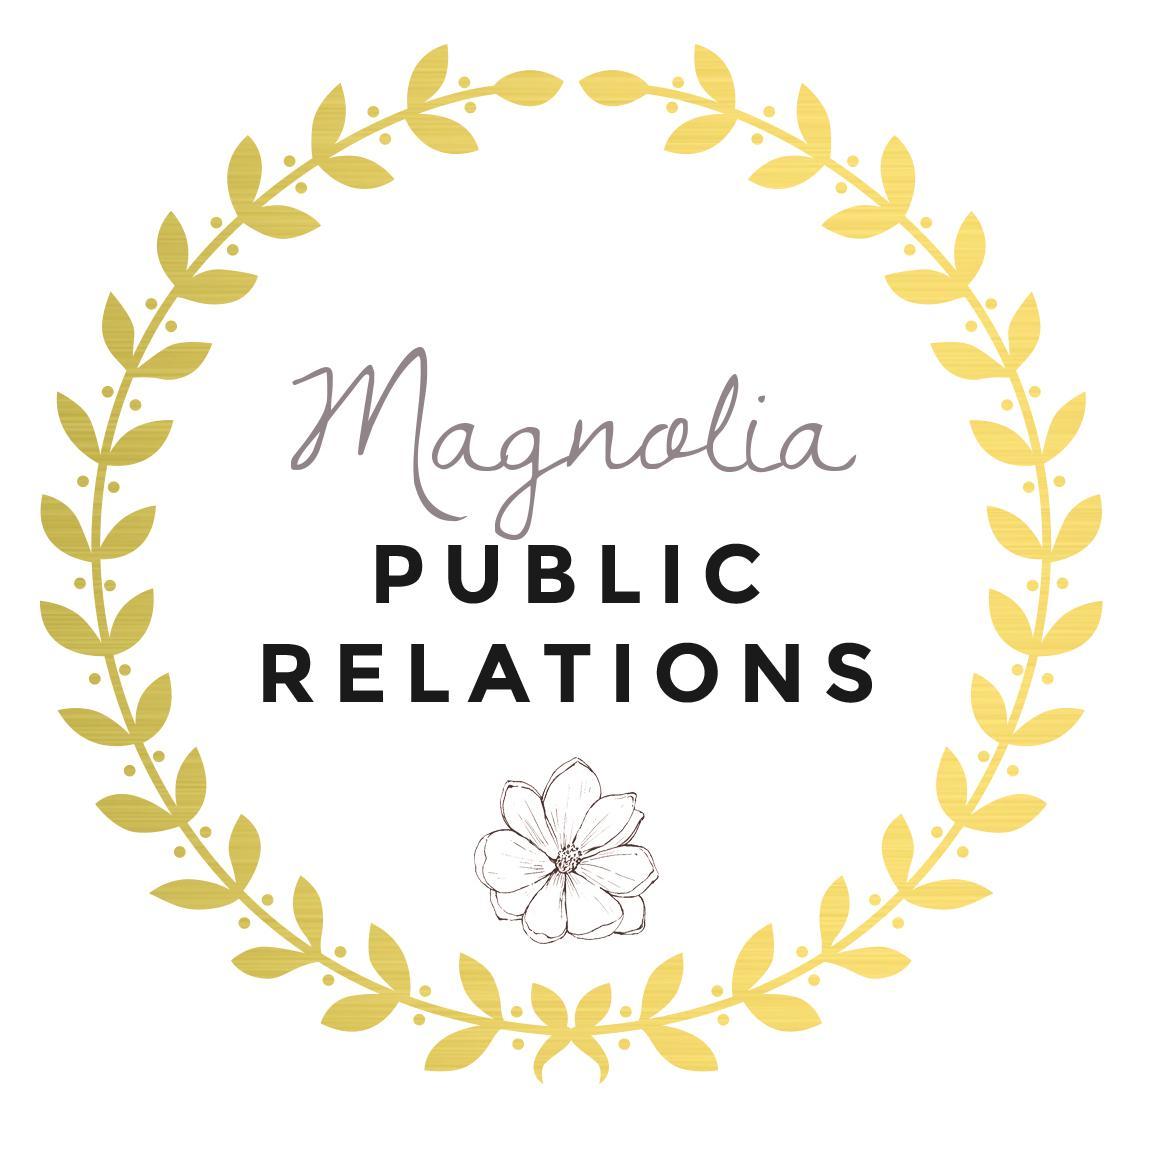 Public relations for experts + lifestyle brands worldwide. Expertises: lifestyle, fashion, & kids/family. Est. 2006. Accepting clients: adrienne@magnoliapr.com